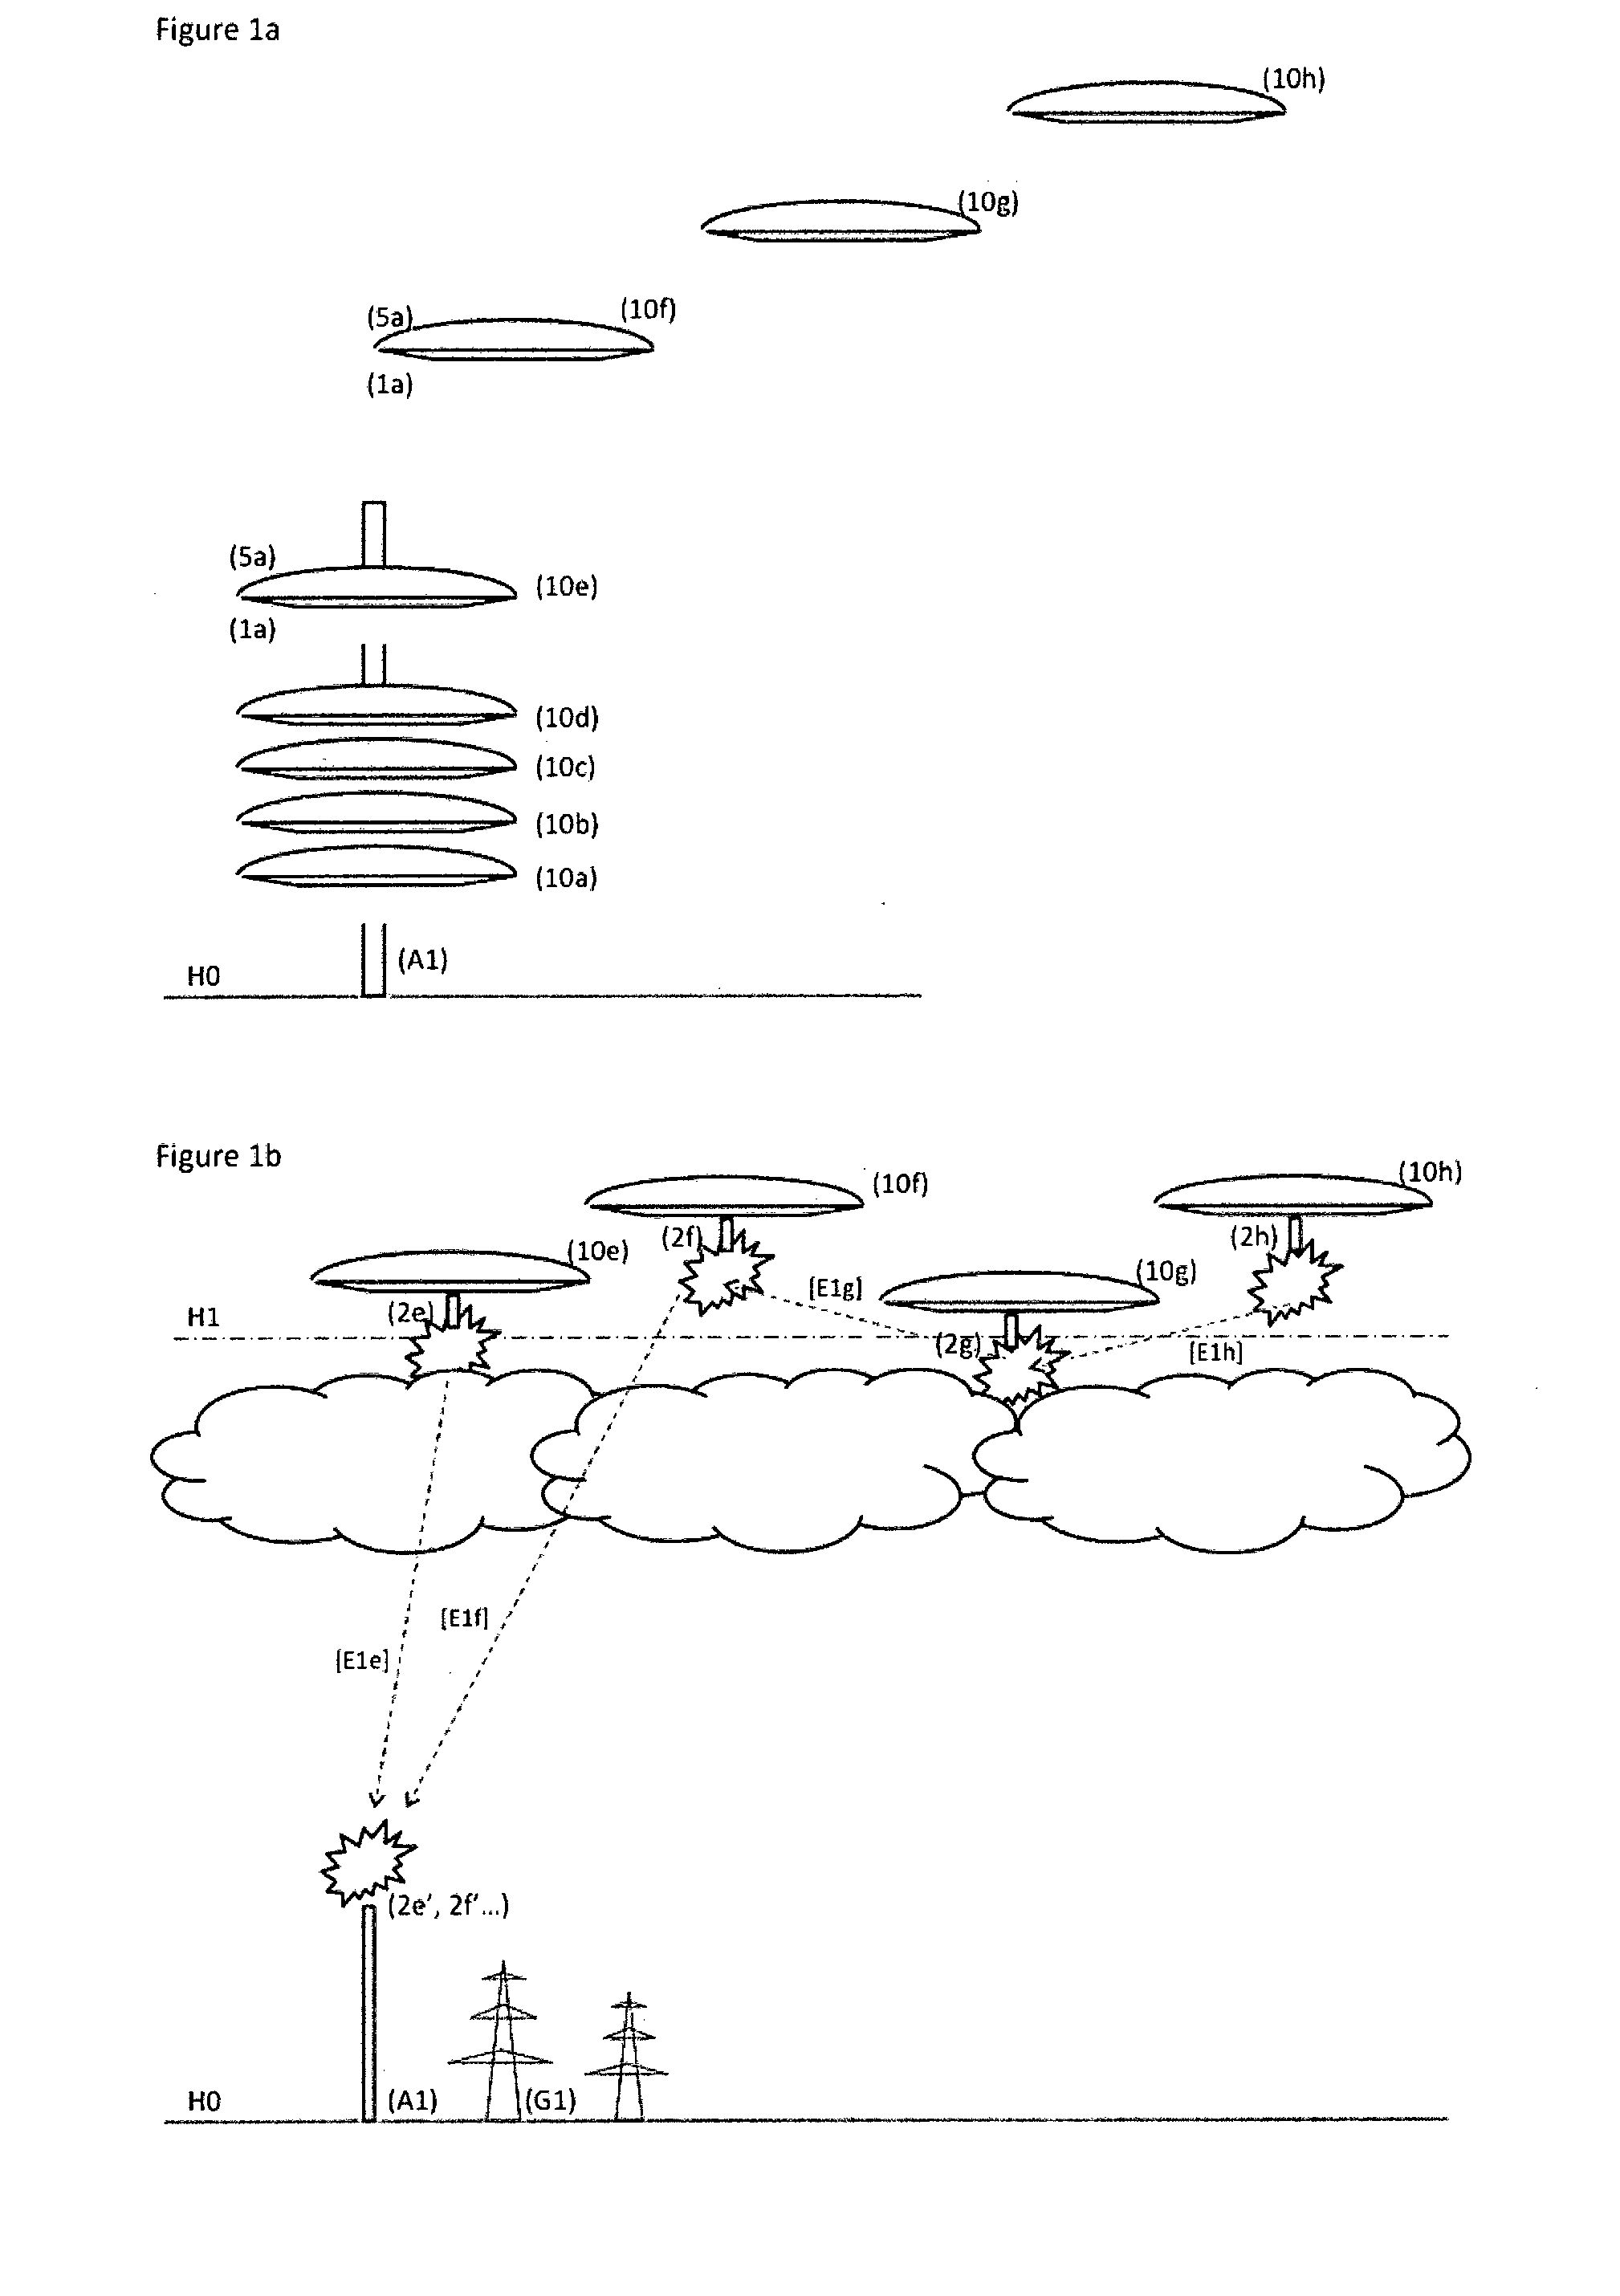 Airborne energy generation and distribution